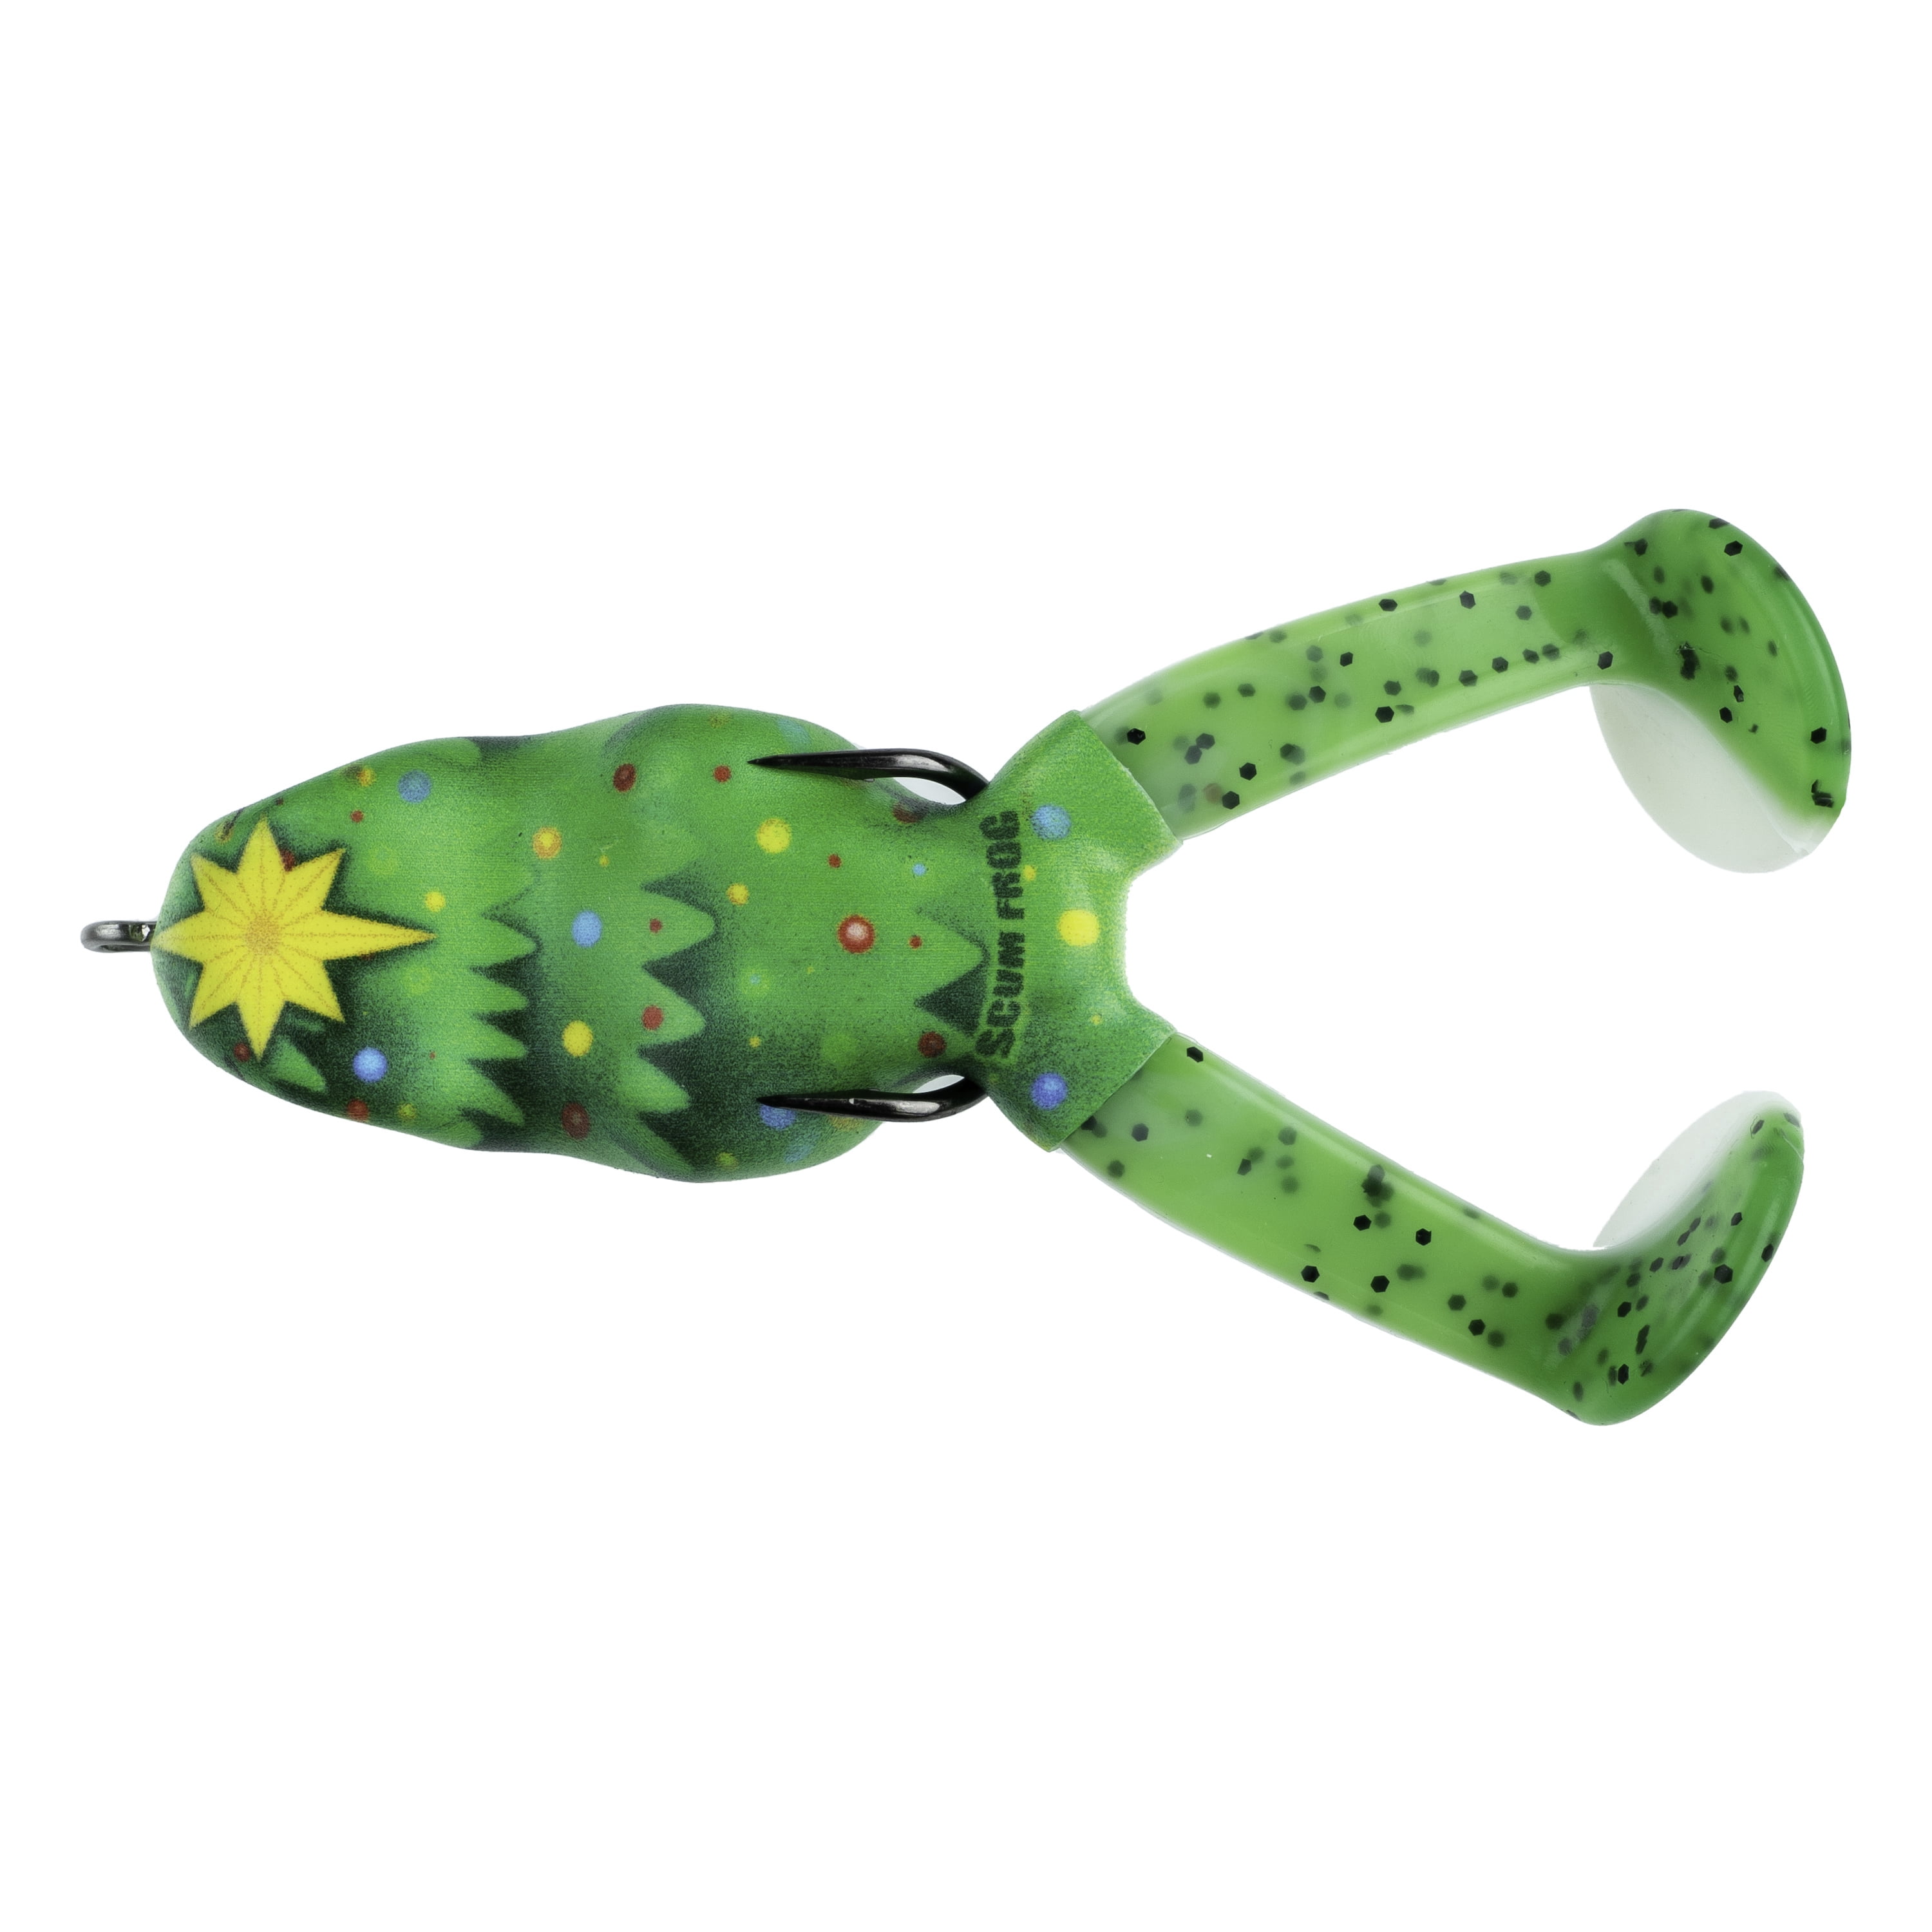 Scum Frog 3/8 oz Big Foot, Christmas Tree, Top Water Hollow Body Frog Lure  